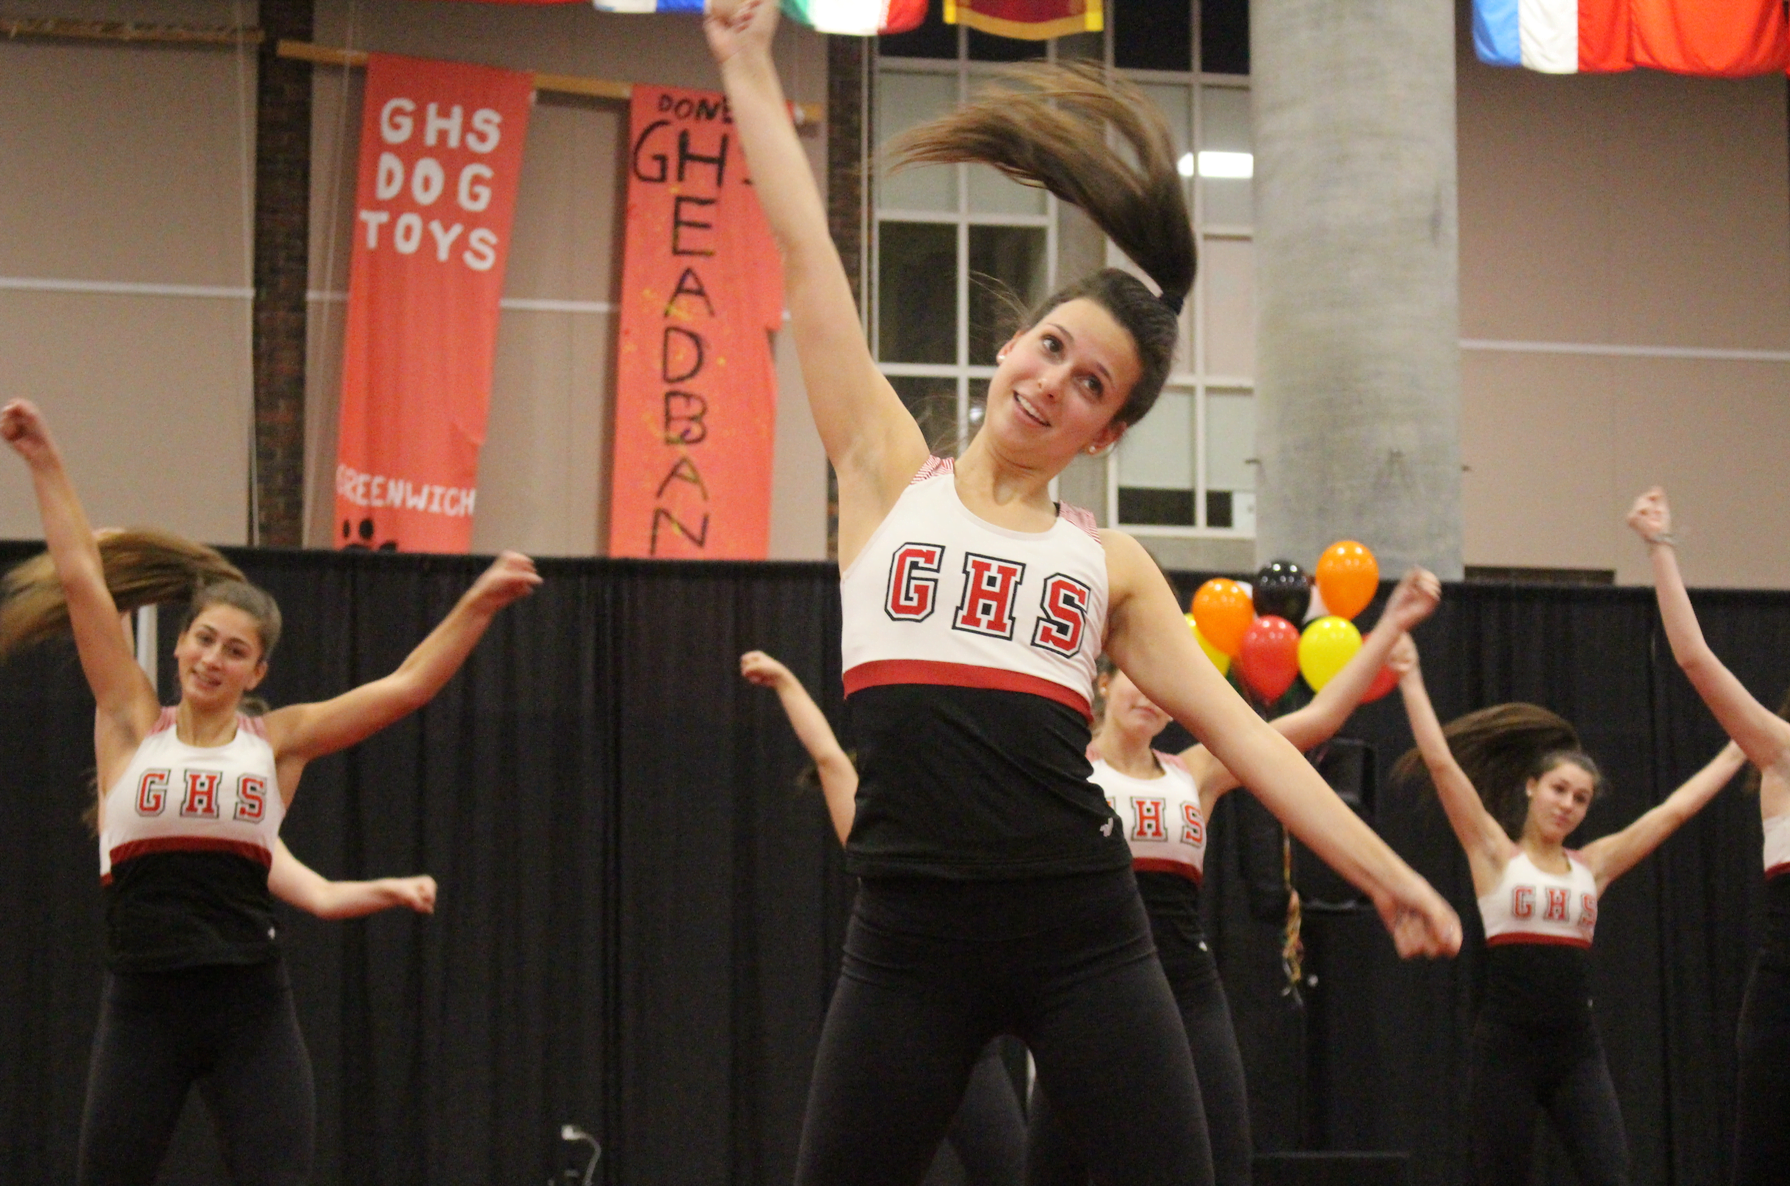 Greenwich High School dance team performed at the GYCL expo in the student center on Nov 5, 2017 Photo: Leslie Yager